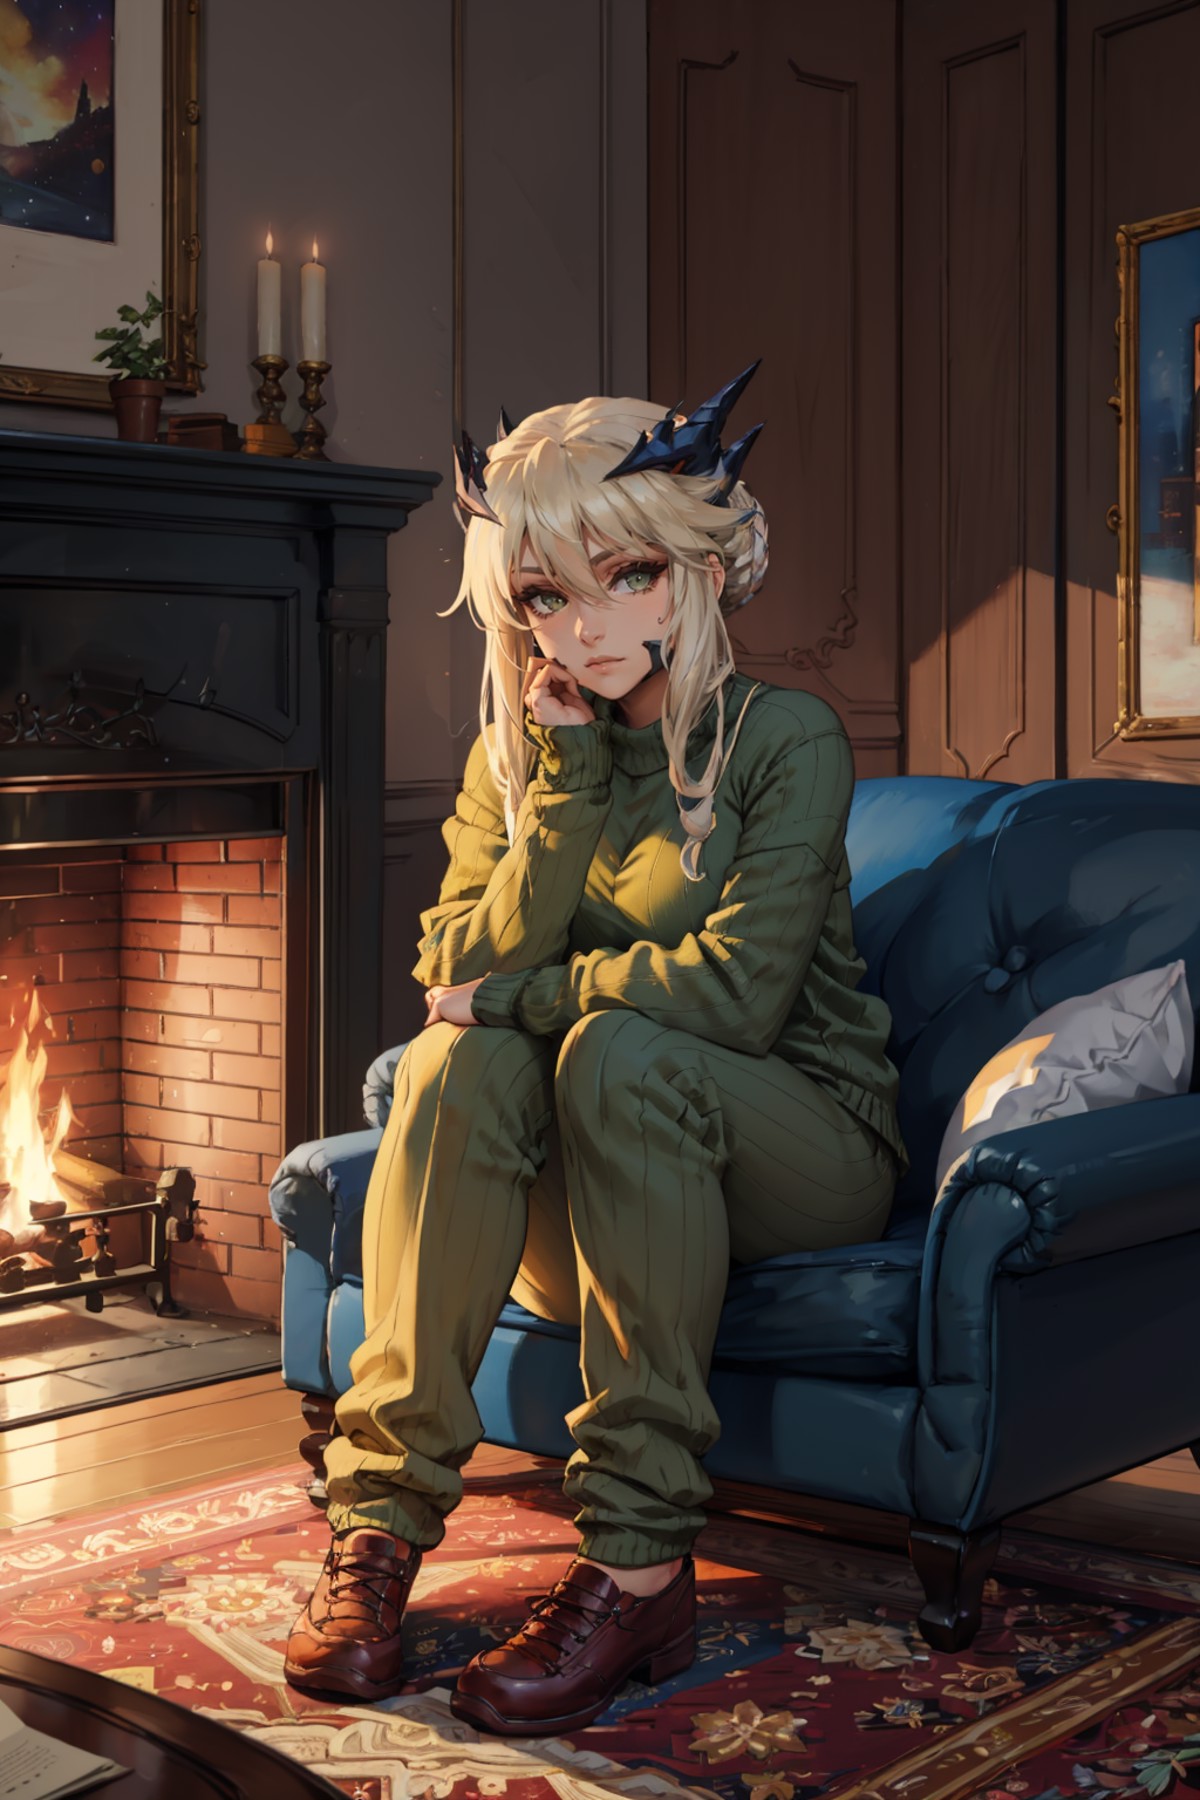 masterpiece, best quality, lancerAlter, green ribbed sweater, winter, house, fireplace, sweatpants, couch, looking at view...